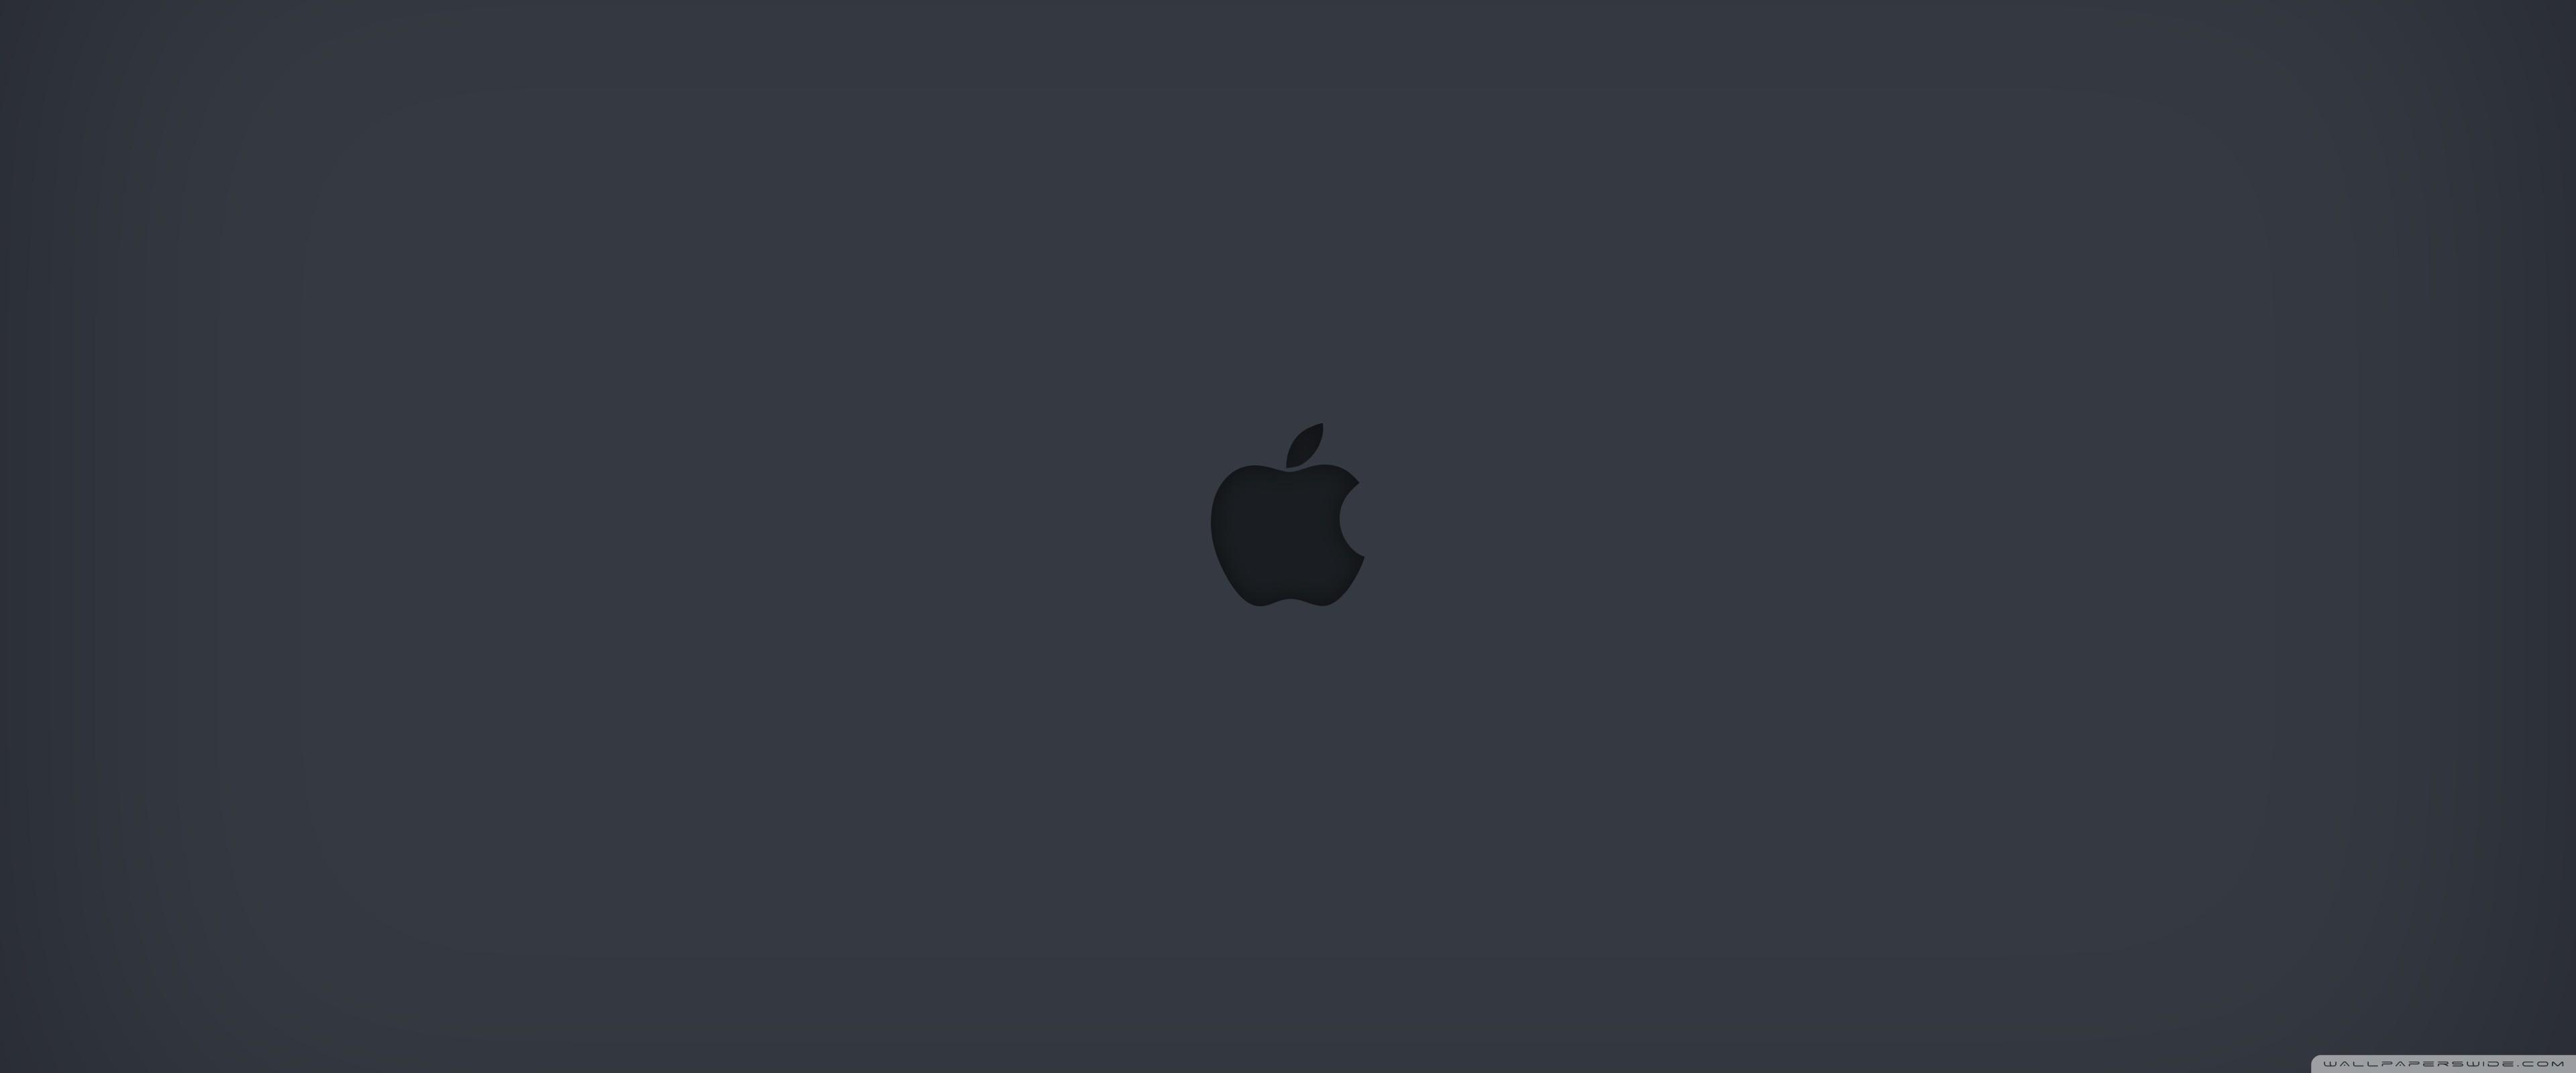 Apple 3840X1600 Wallpapers - Top Free Apple 3840X1600 Backgrounds ...